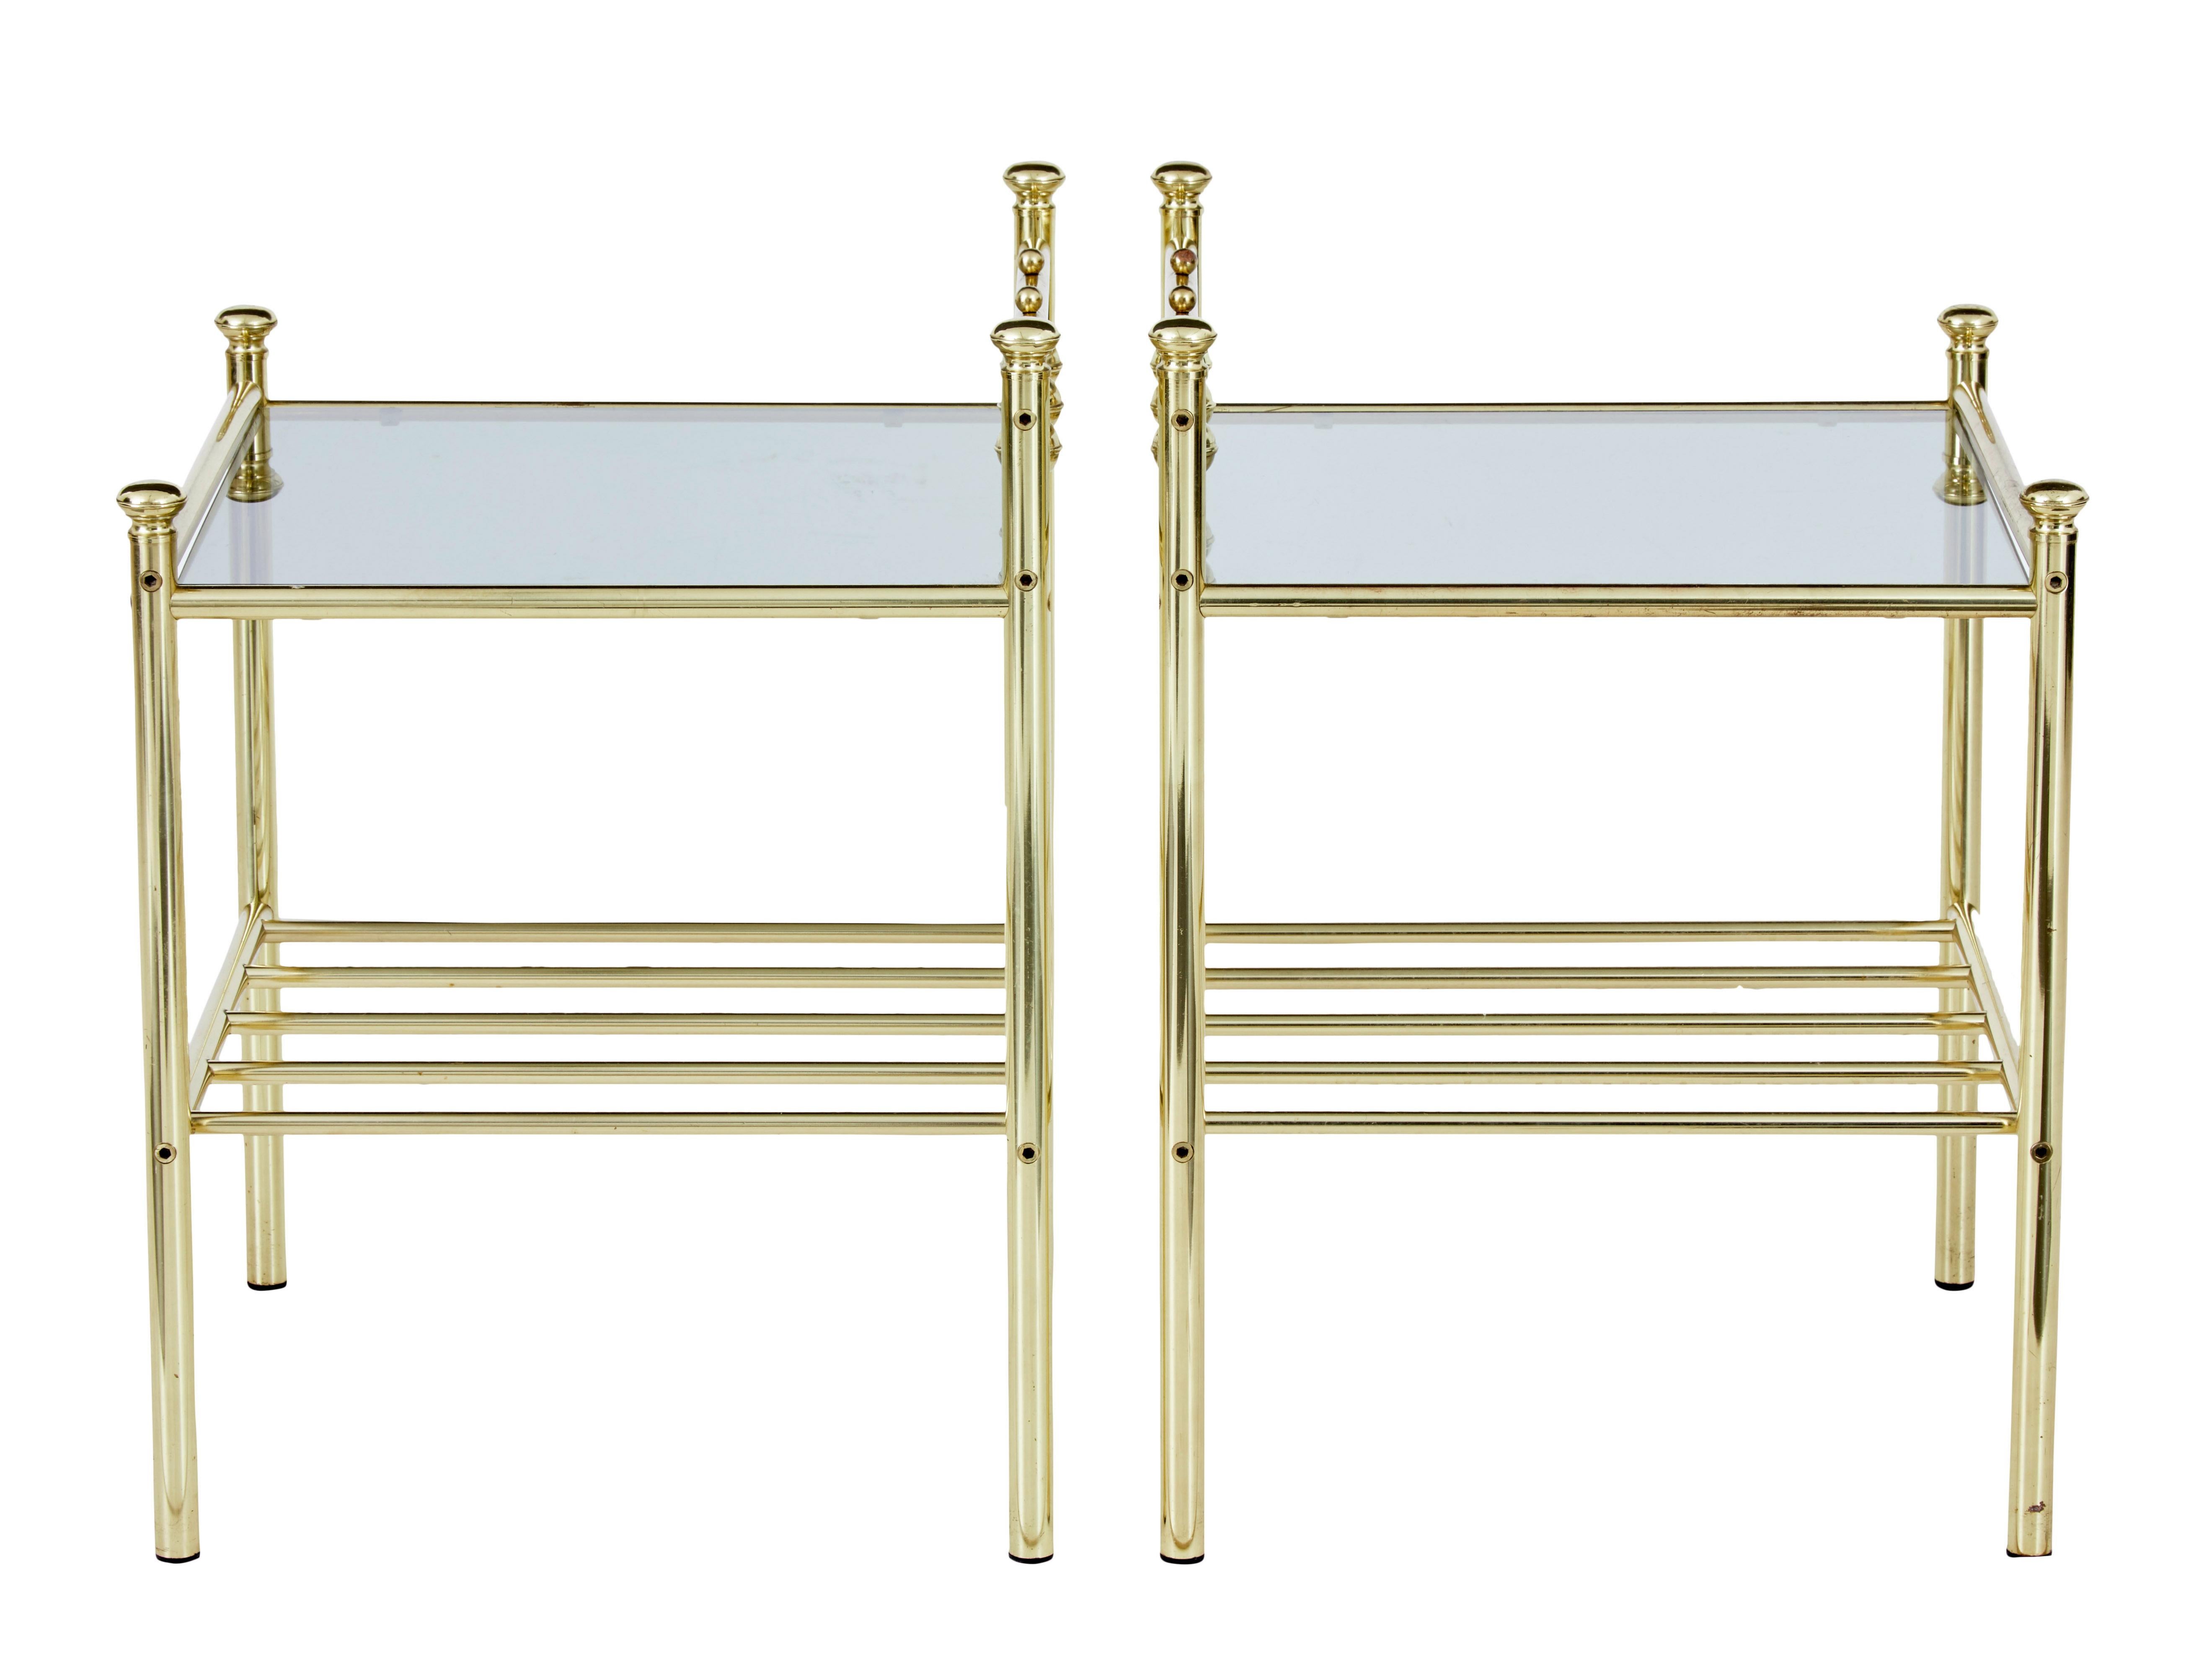 Pair of mid-20th century brass glass top occasional tables, circa 1960.

Pair of useful brass lamp / side tables. Brass spindles. With smoked glass top with lower open shelf.

Minor surface marks.